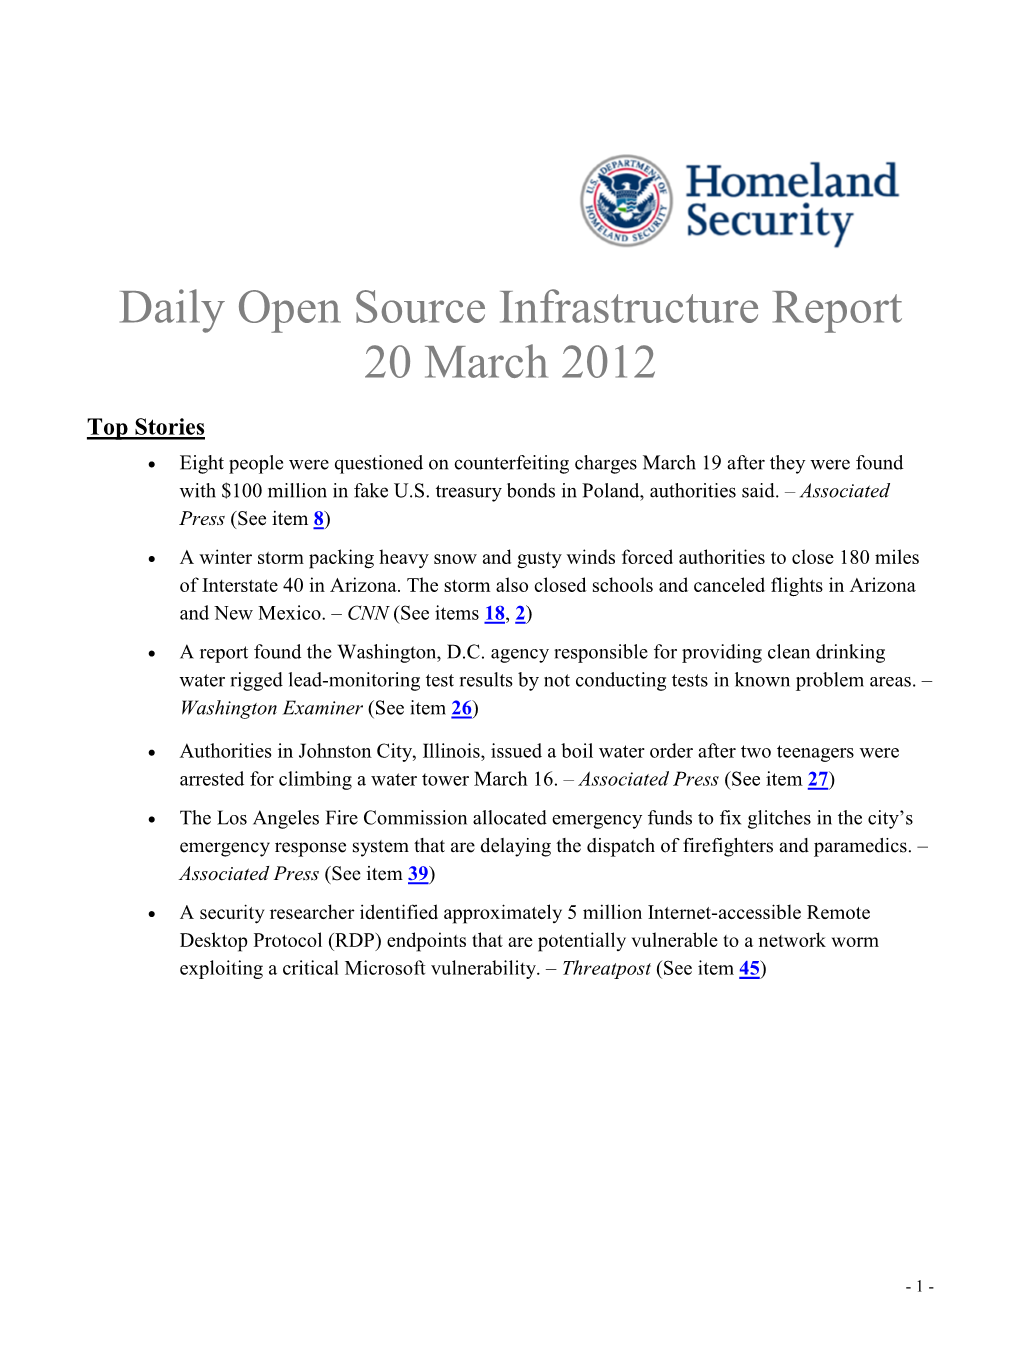 Department of Homeland Security Daily Open Source Infrastructure